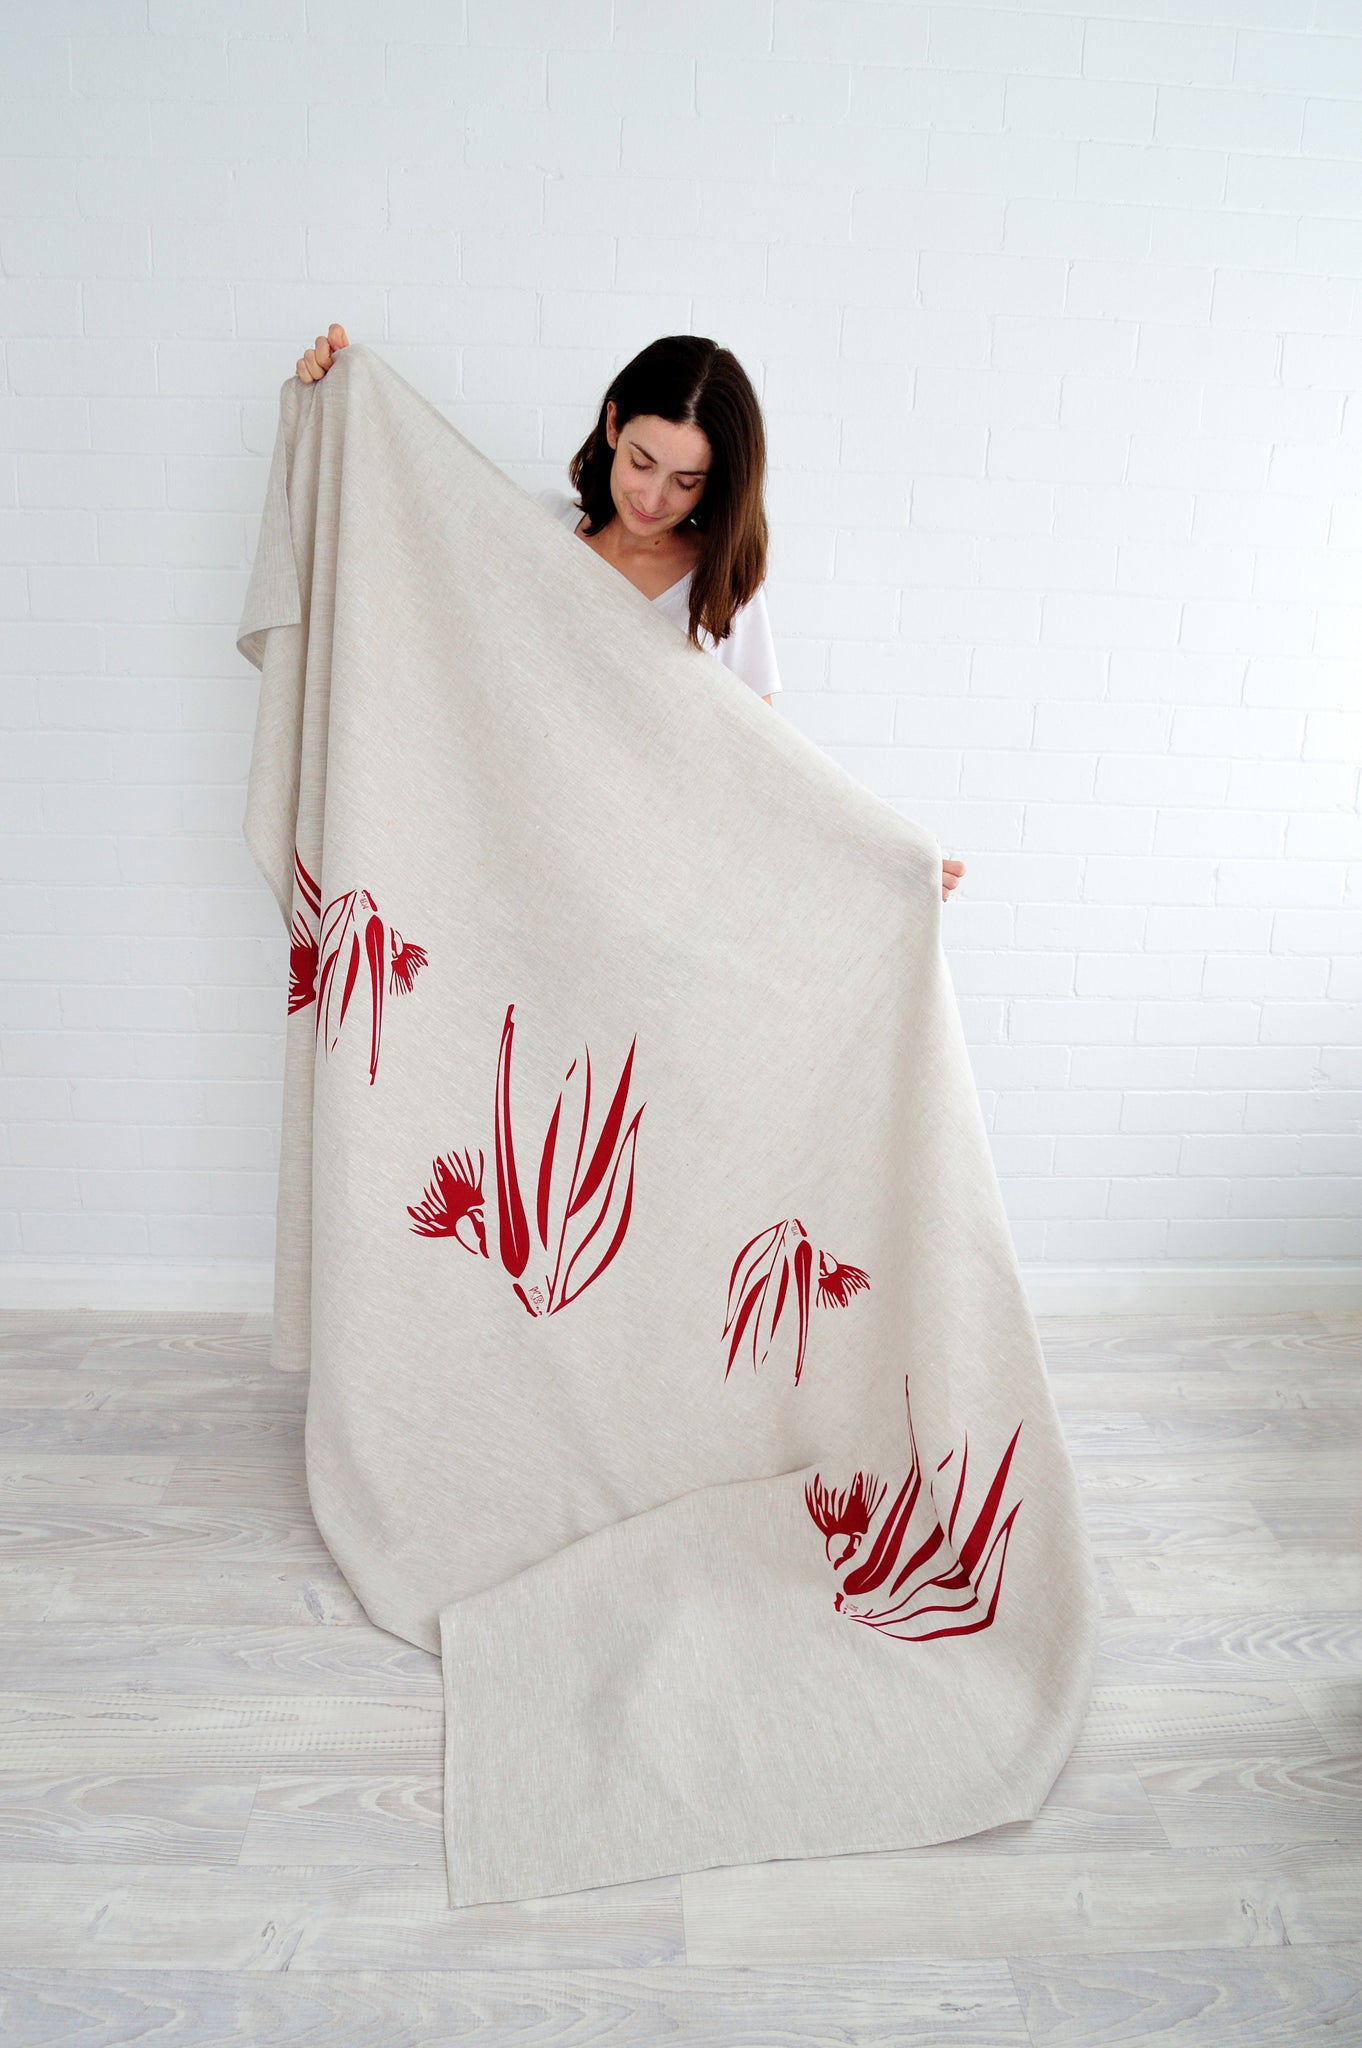 100% linen hand screen printed red gum nut tablecloth by Krystol Brailey Designs